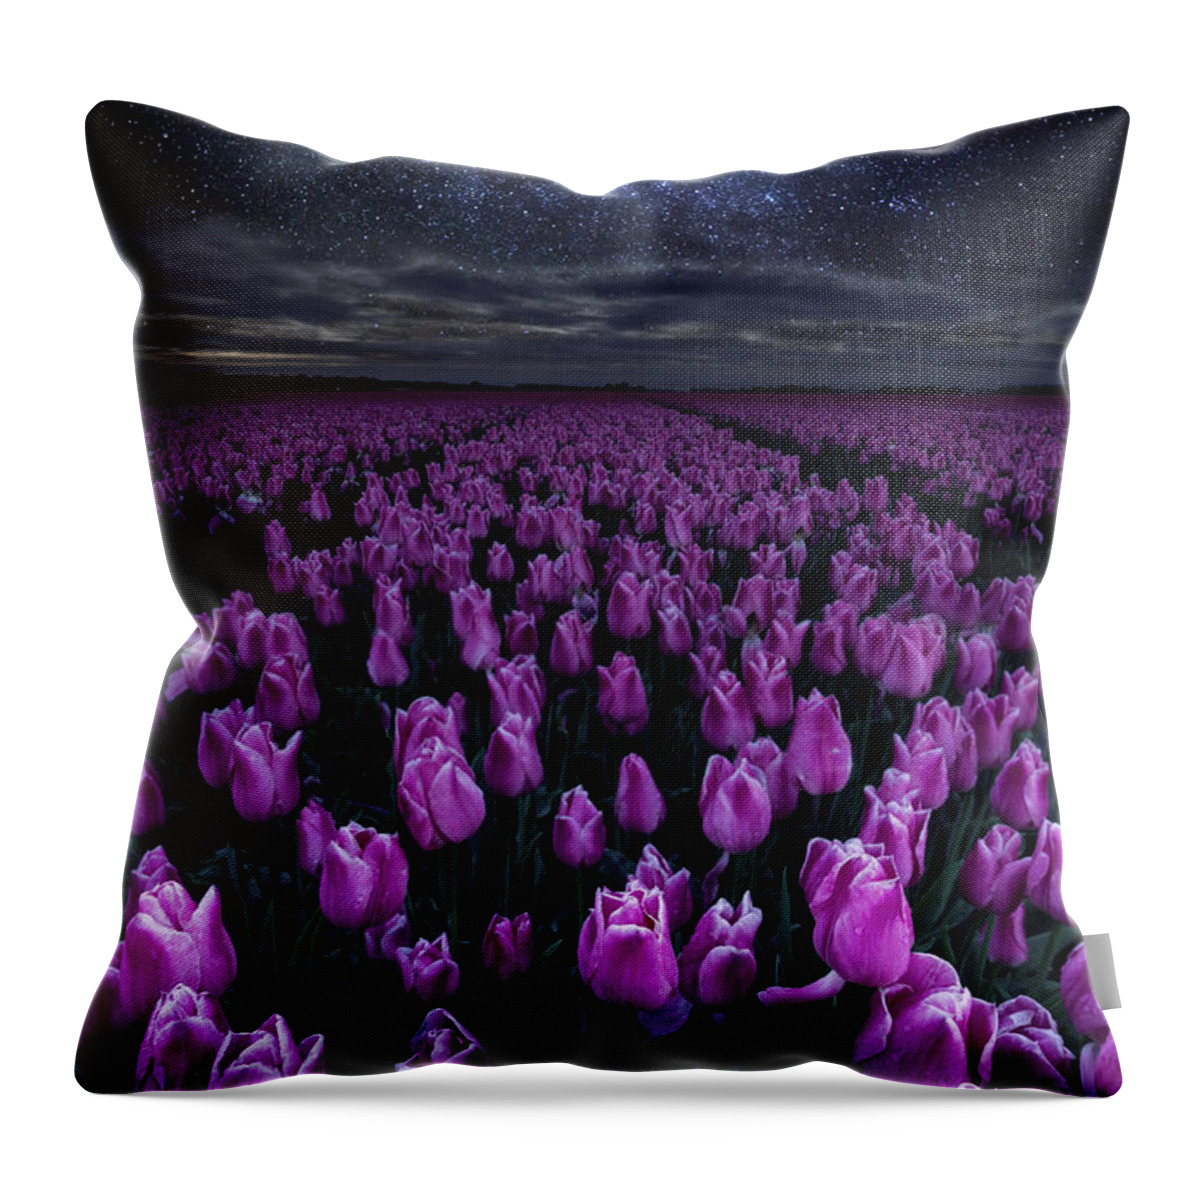 Landscape Throw Pillow featuring the photograph Starlight by Jorge Maia